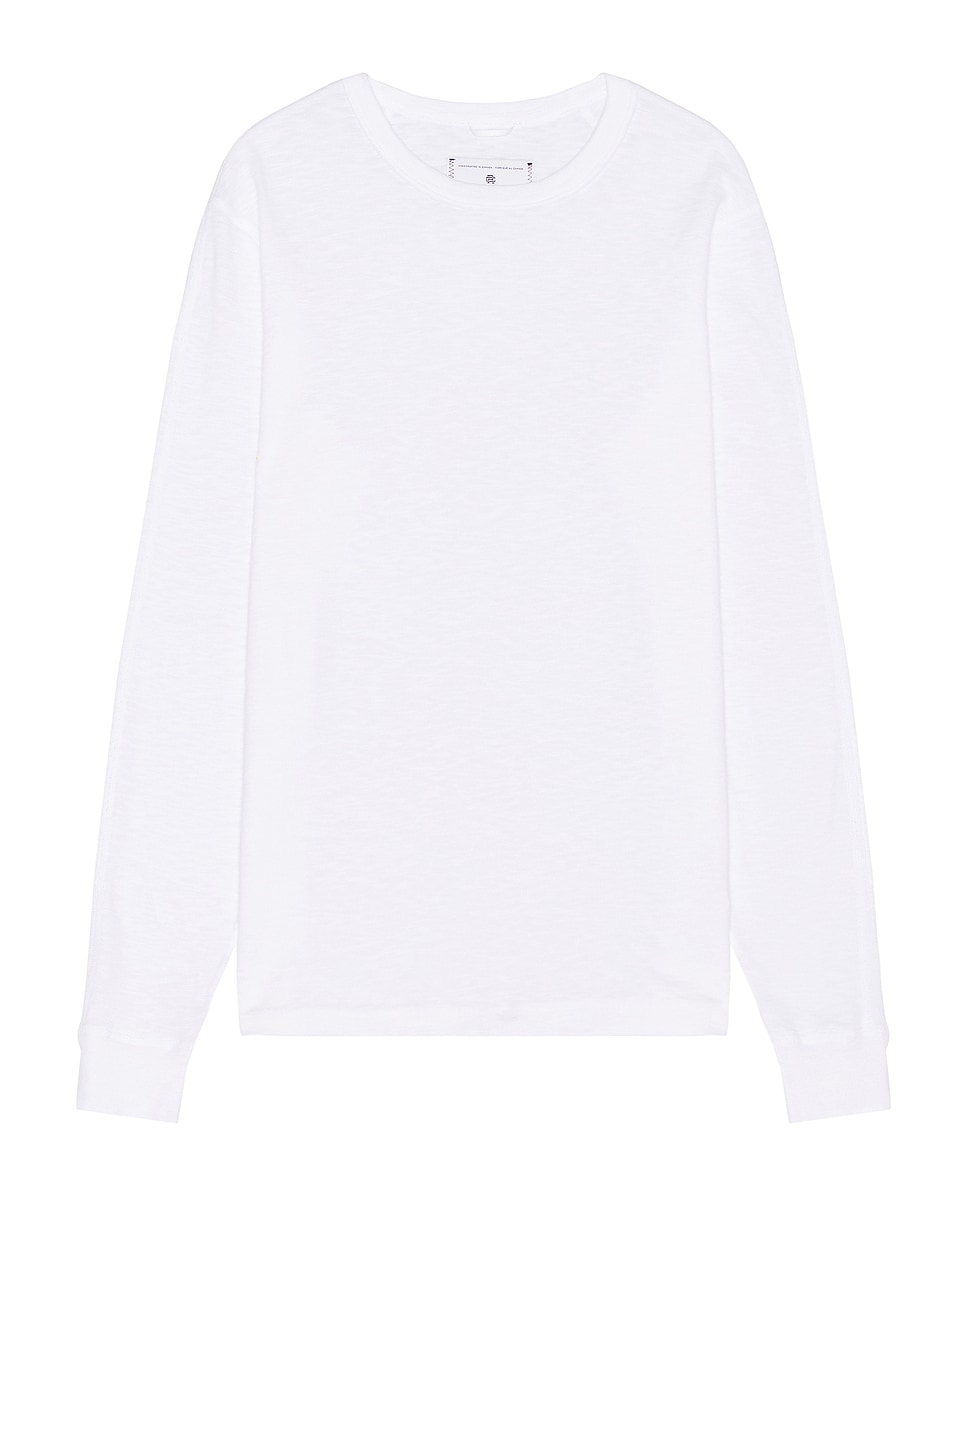 Image 1 of Reigning Champ Reigning Champ 1x1 Slub Long Sleeve in White